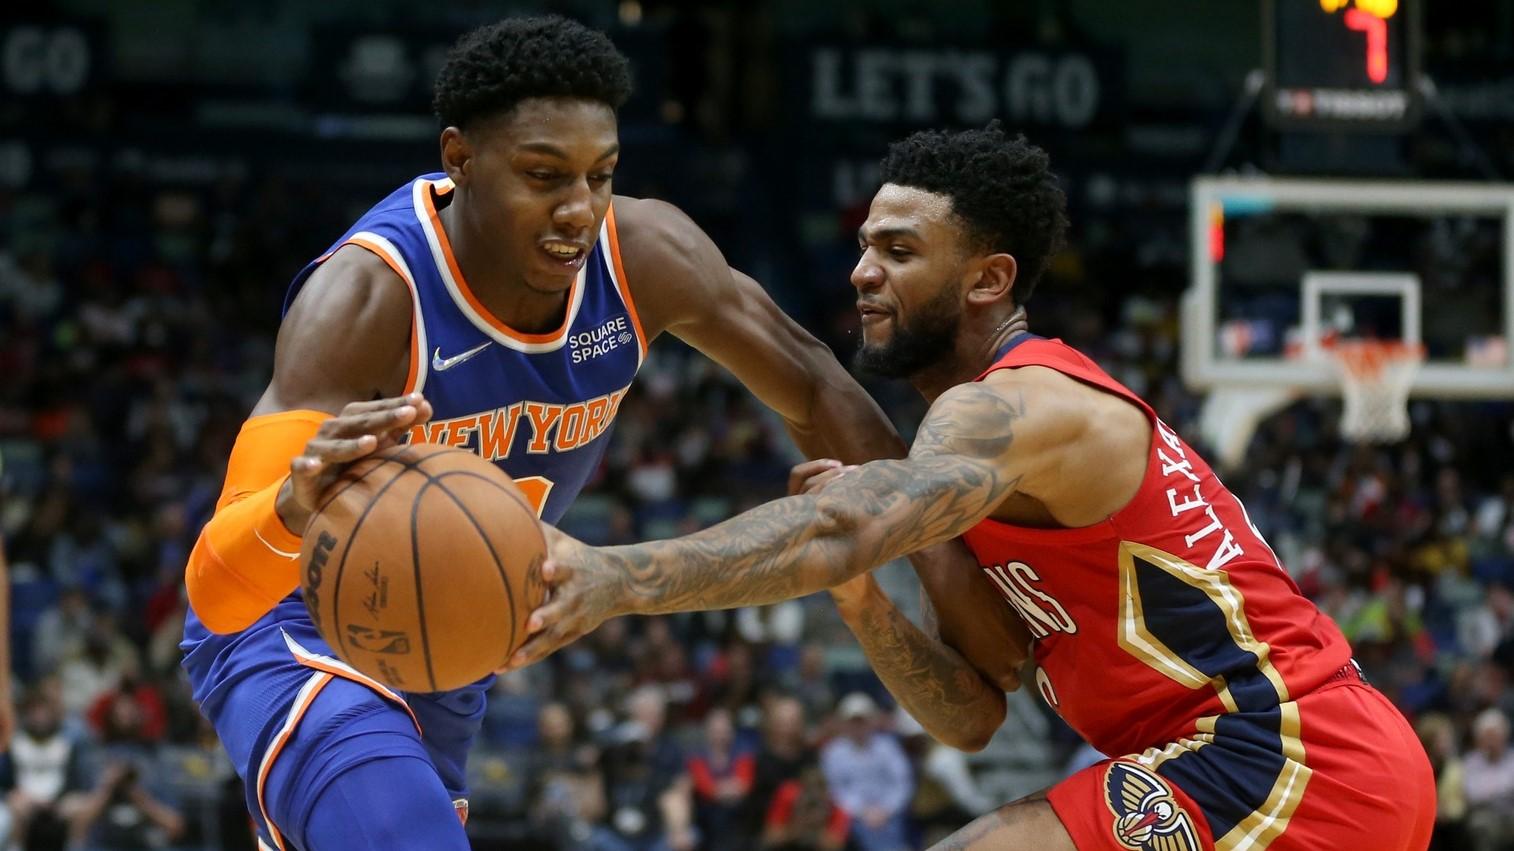 Oct 30, 2021; New Orleans, Louisiana, USA; New York Knicks guard RJ Barrett (9) is defended by New Orleans Pelicans guard Nickeil Alexander-Walker (6) in the second quarter at the Smoothie King Center. / Chuck Cook-USA TODAY Sports